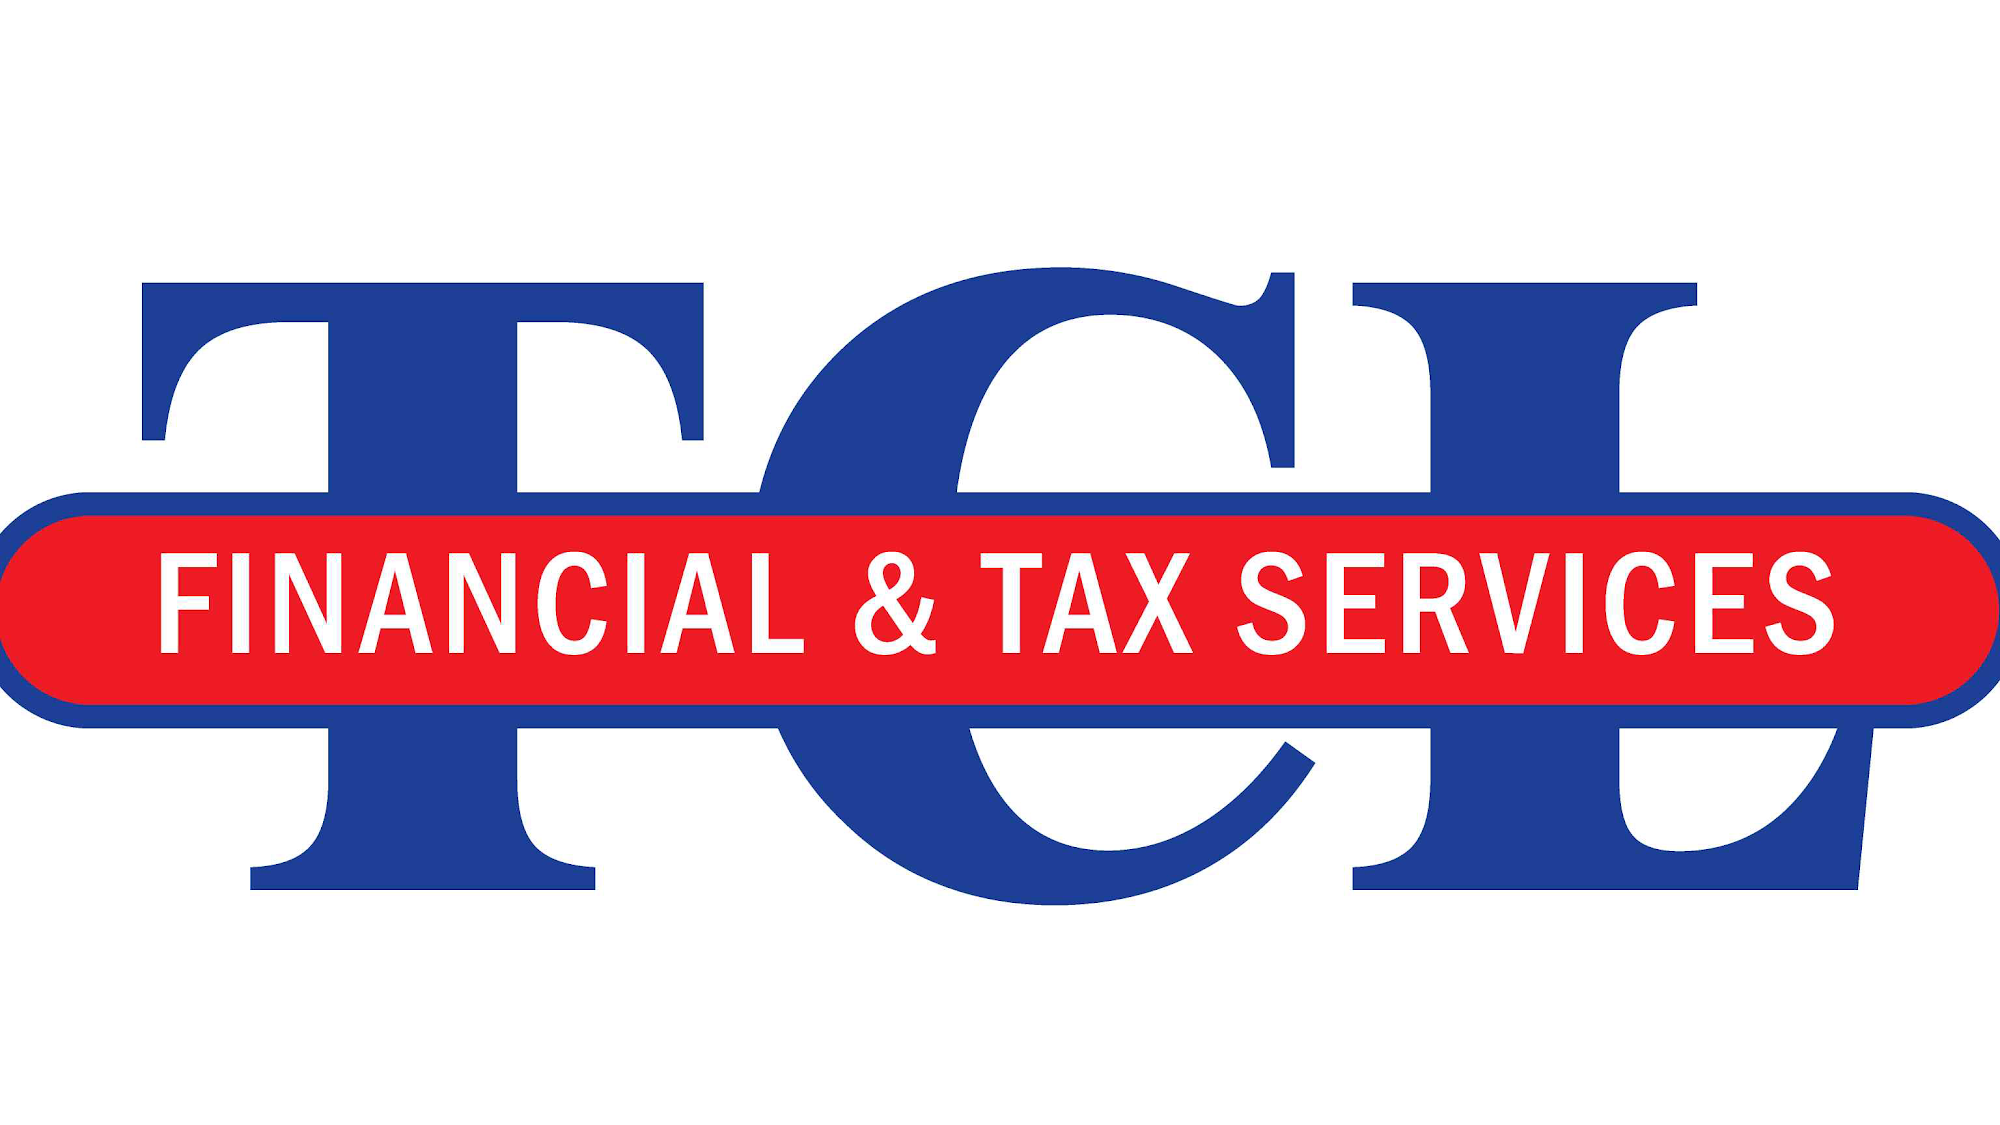 TCL Financial & Tax Services